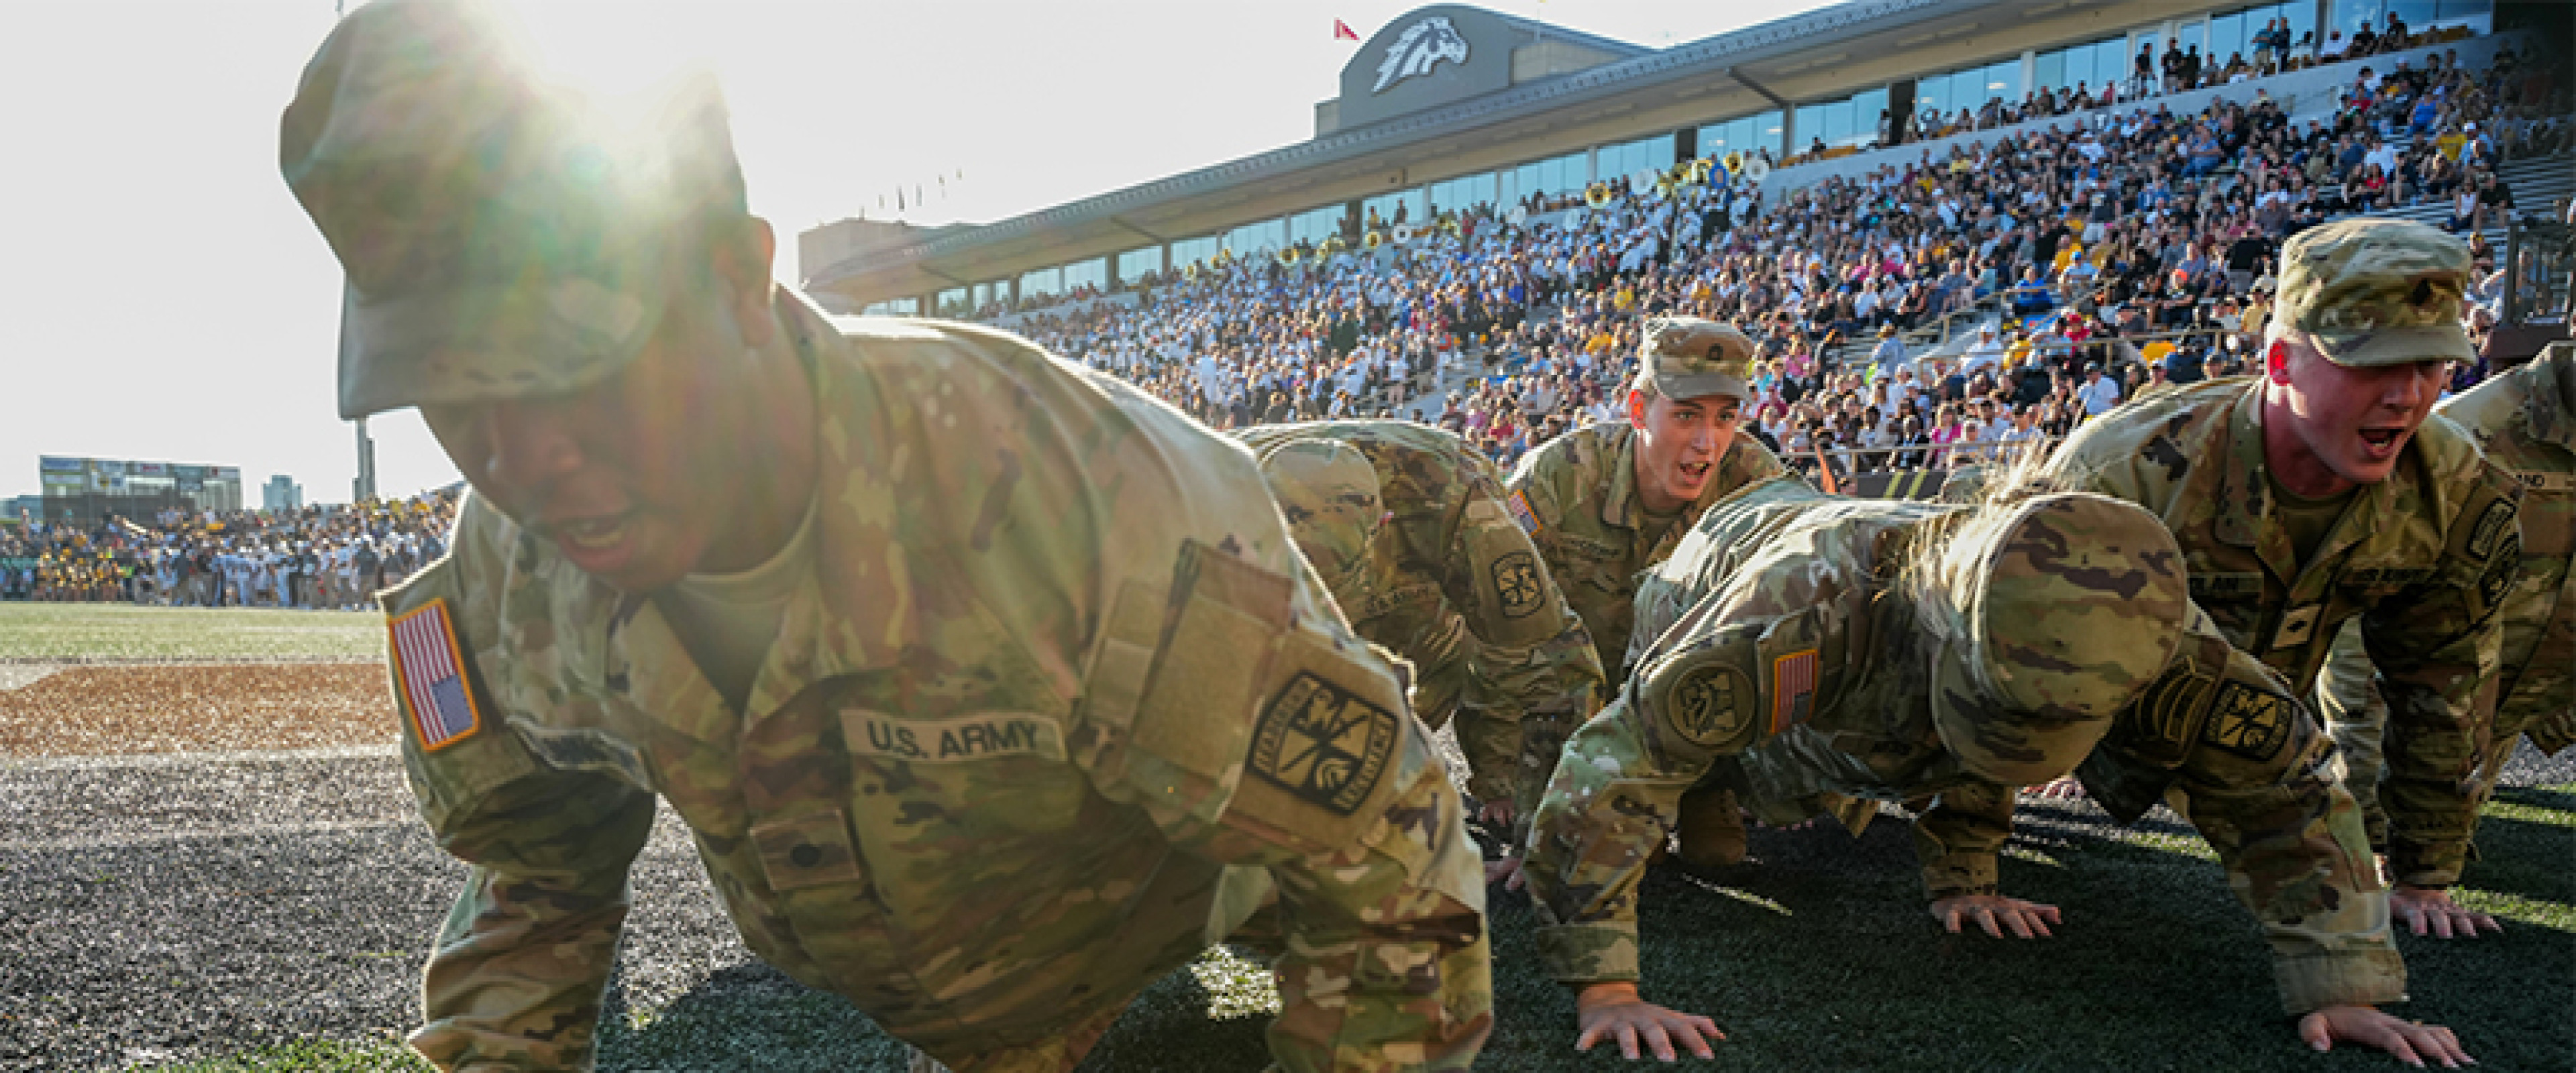 Cadets in uniform doing pushups in the end zone of a WMU football game.